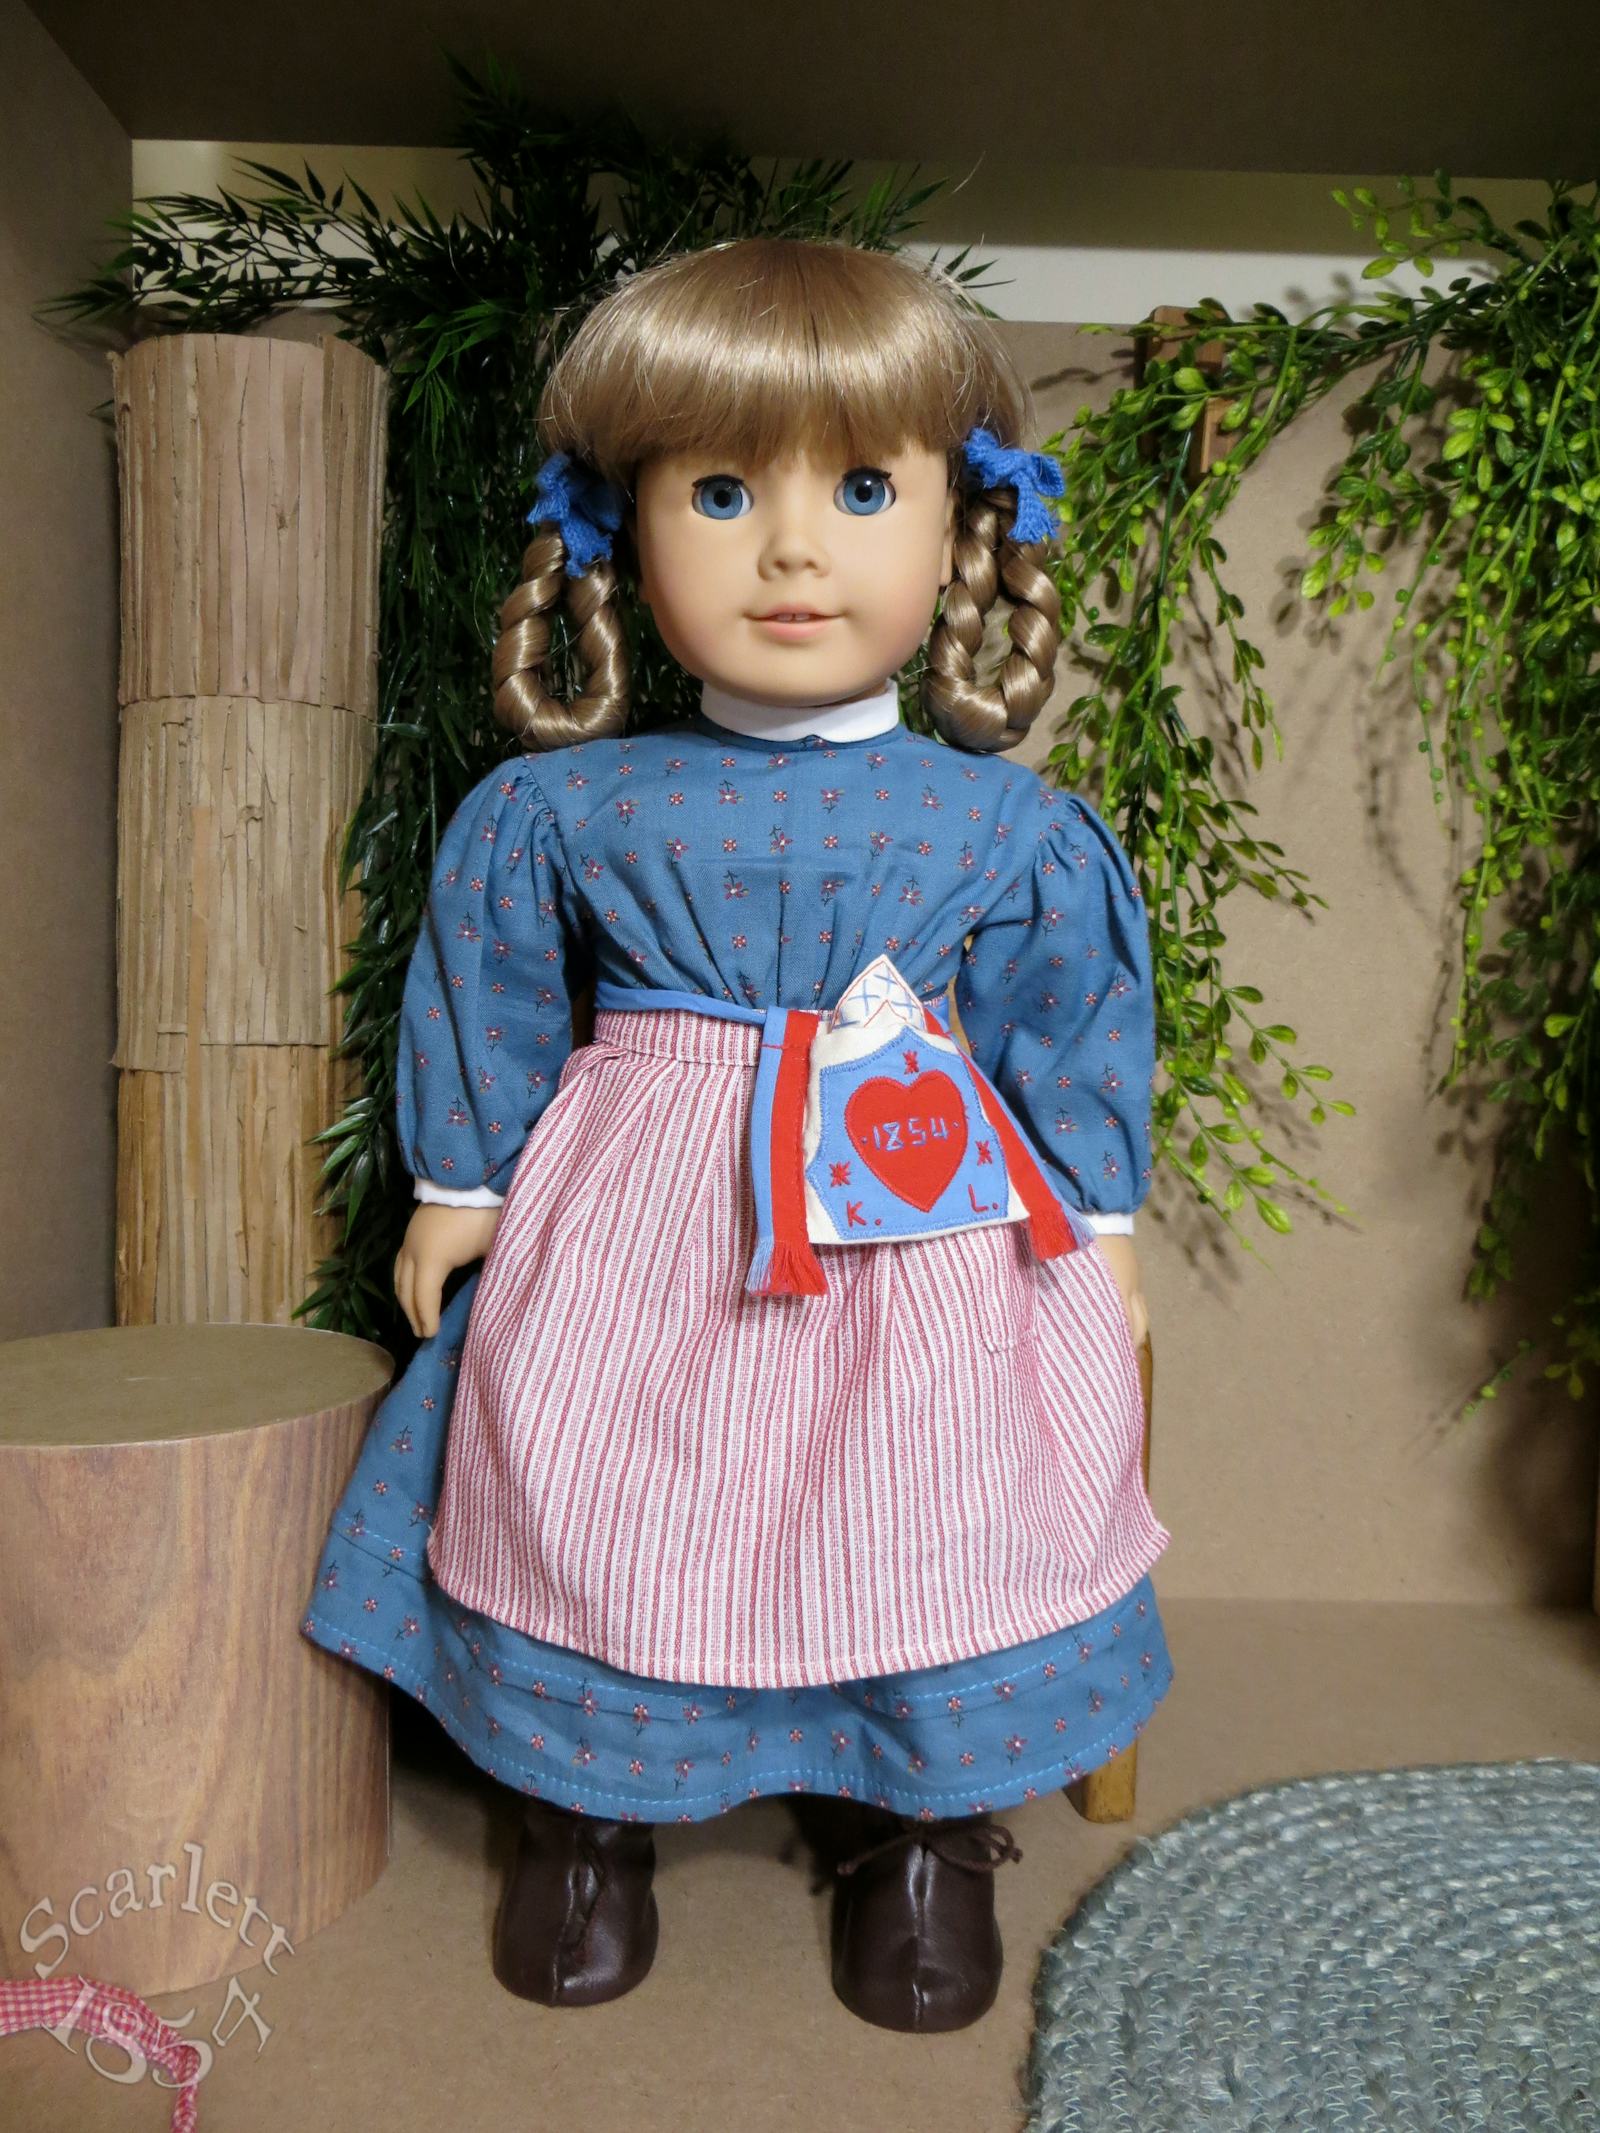 american-girl-dolls-are-being-sold-for-insane-prices-on-ebay-so-let-s